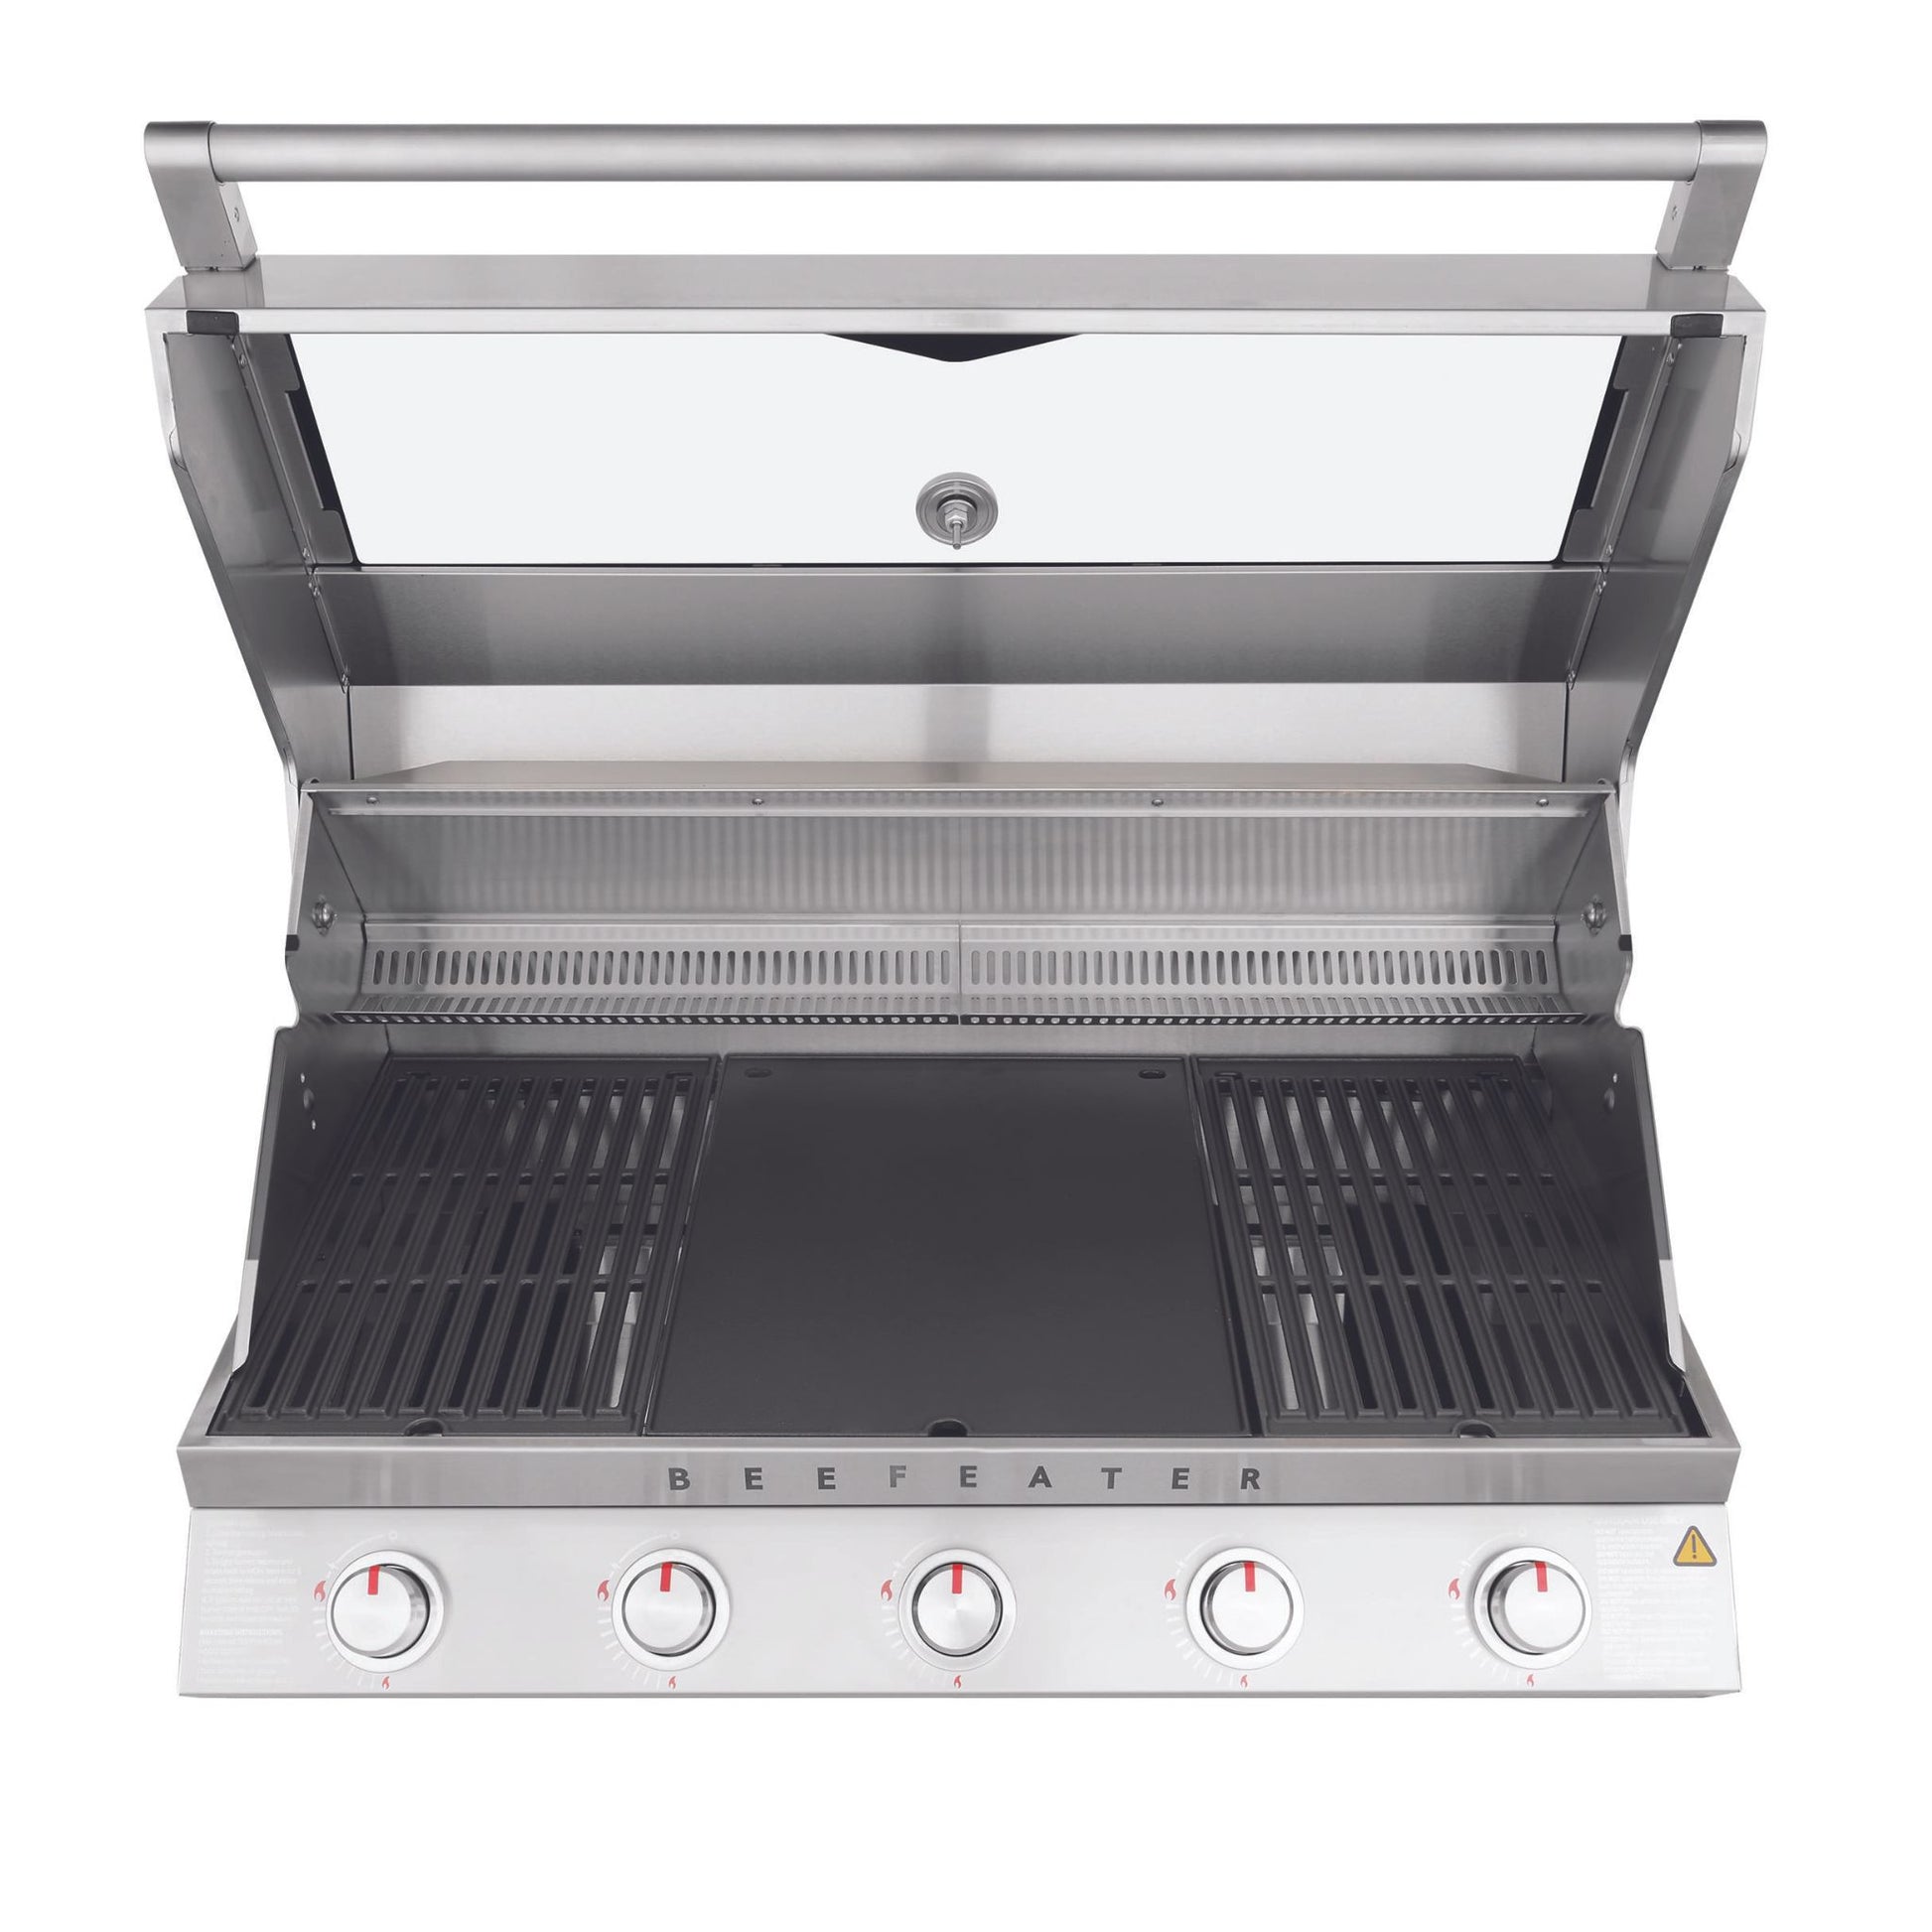 BeefEater Built-In Classic Barbecue 5 Burner